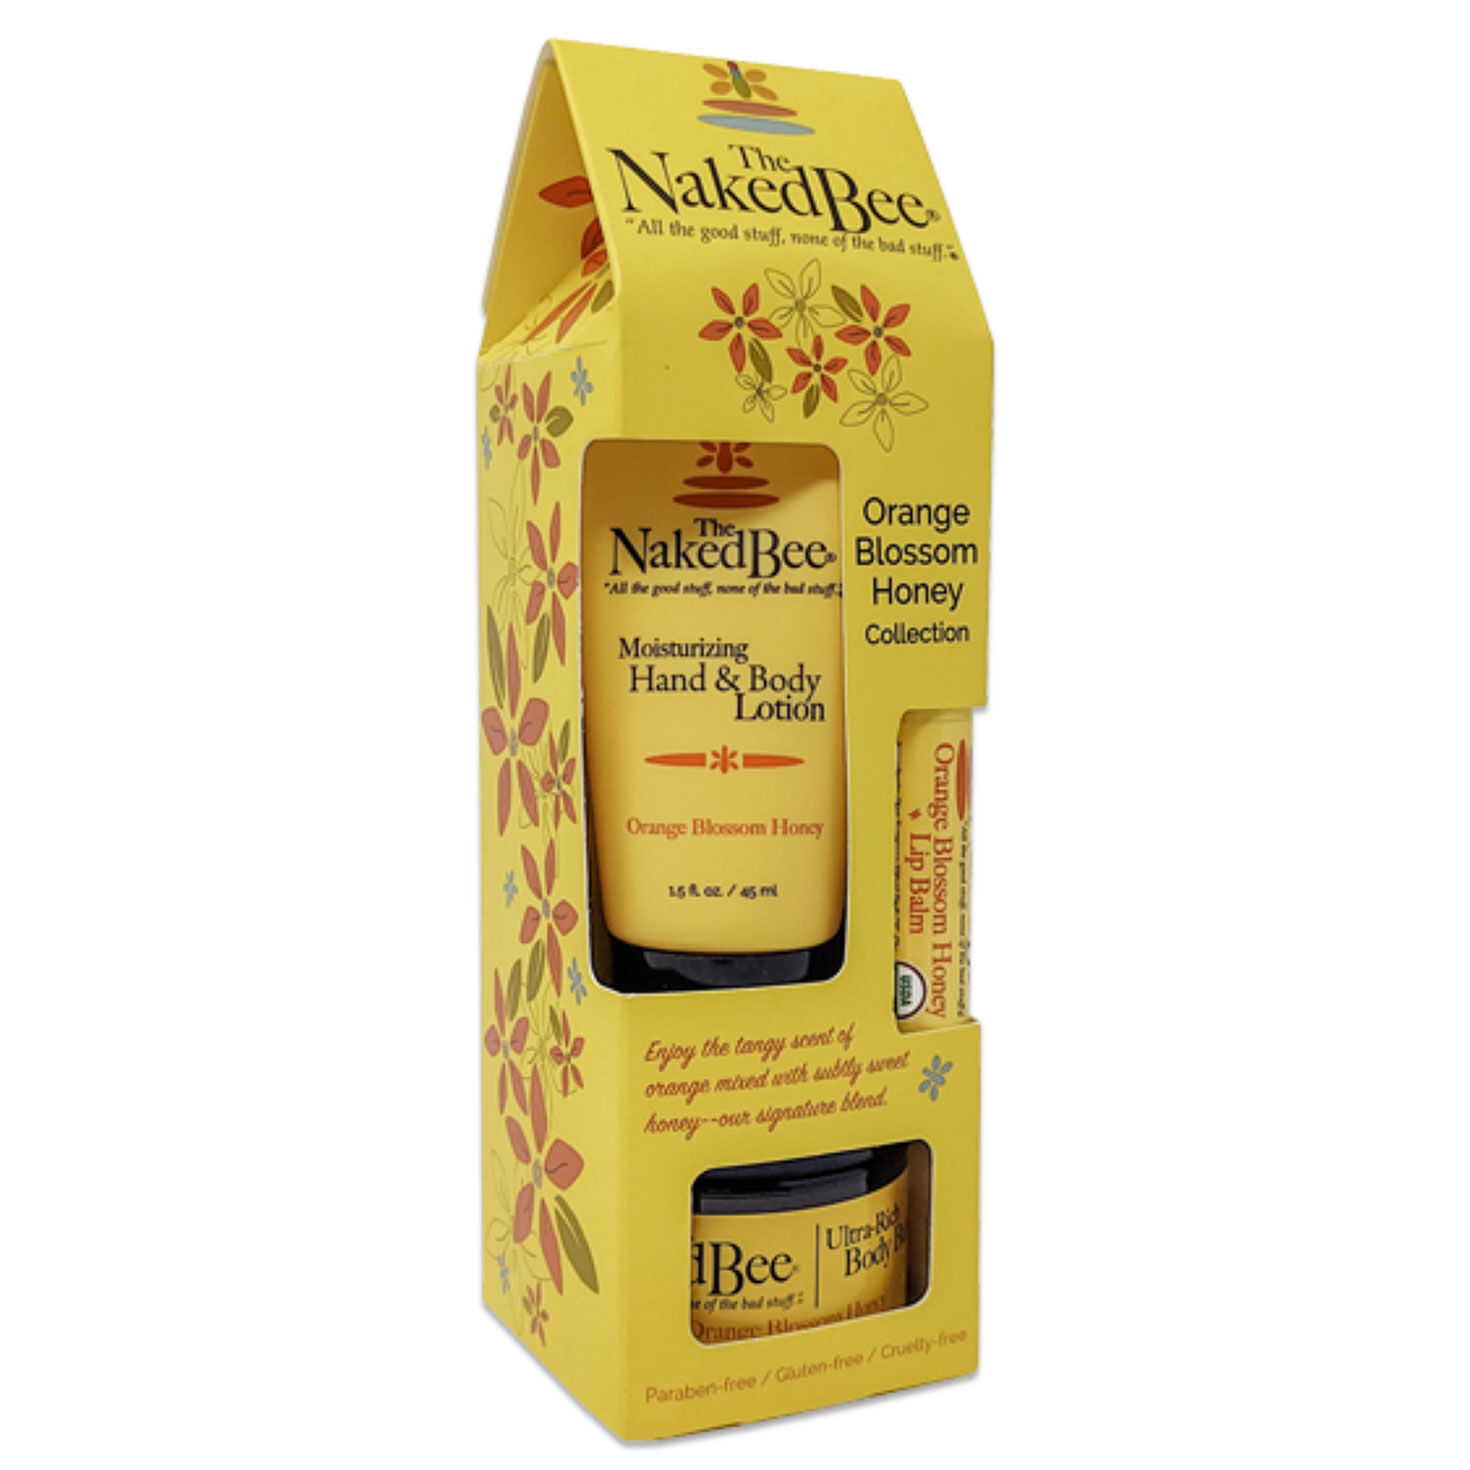 The Naked Bee Orange Blossom Honey Hand and Body Care, Set of 3 for only USD 10.99 | Hallmark